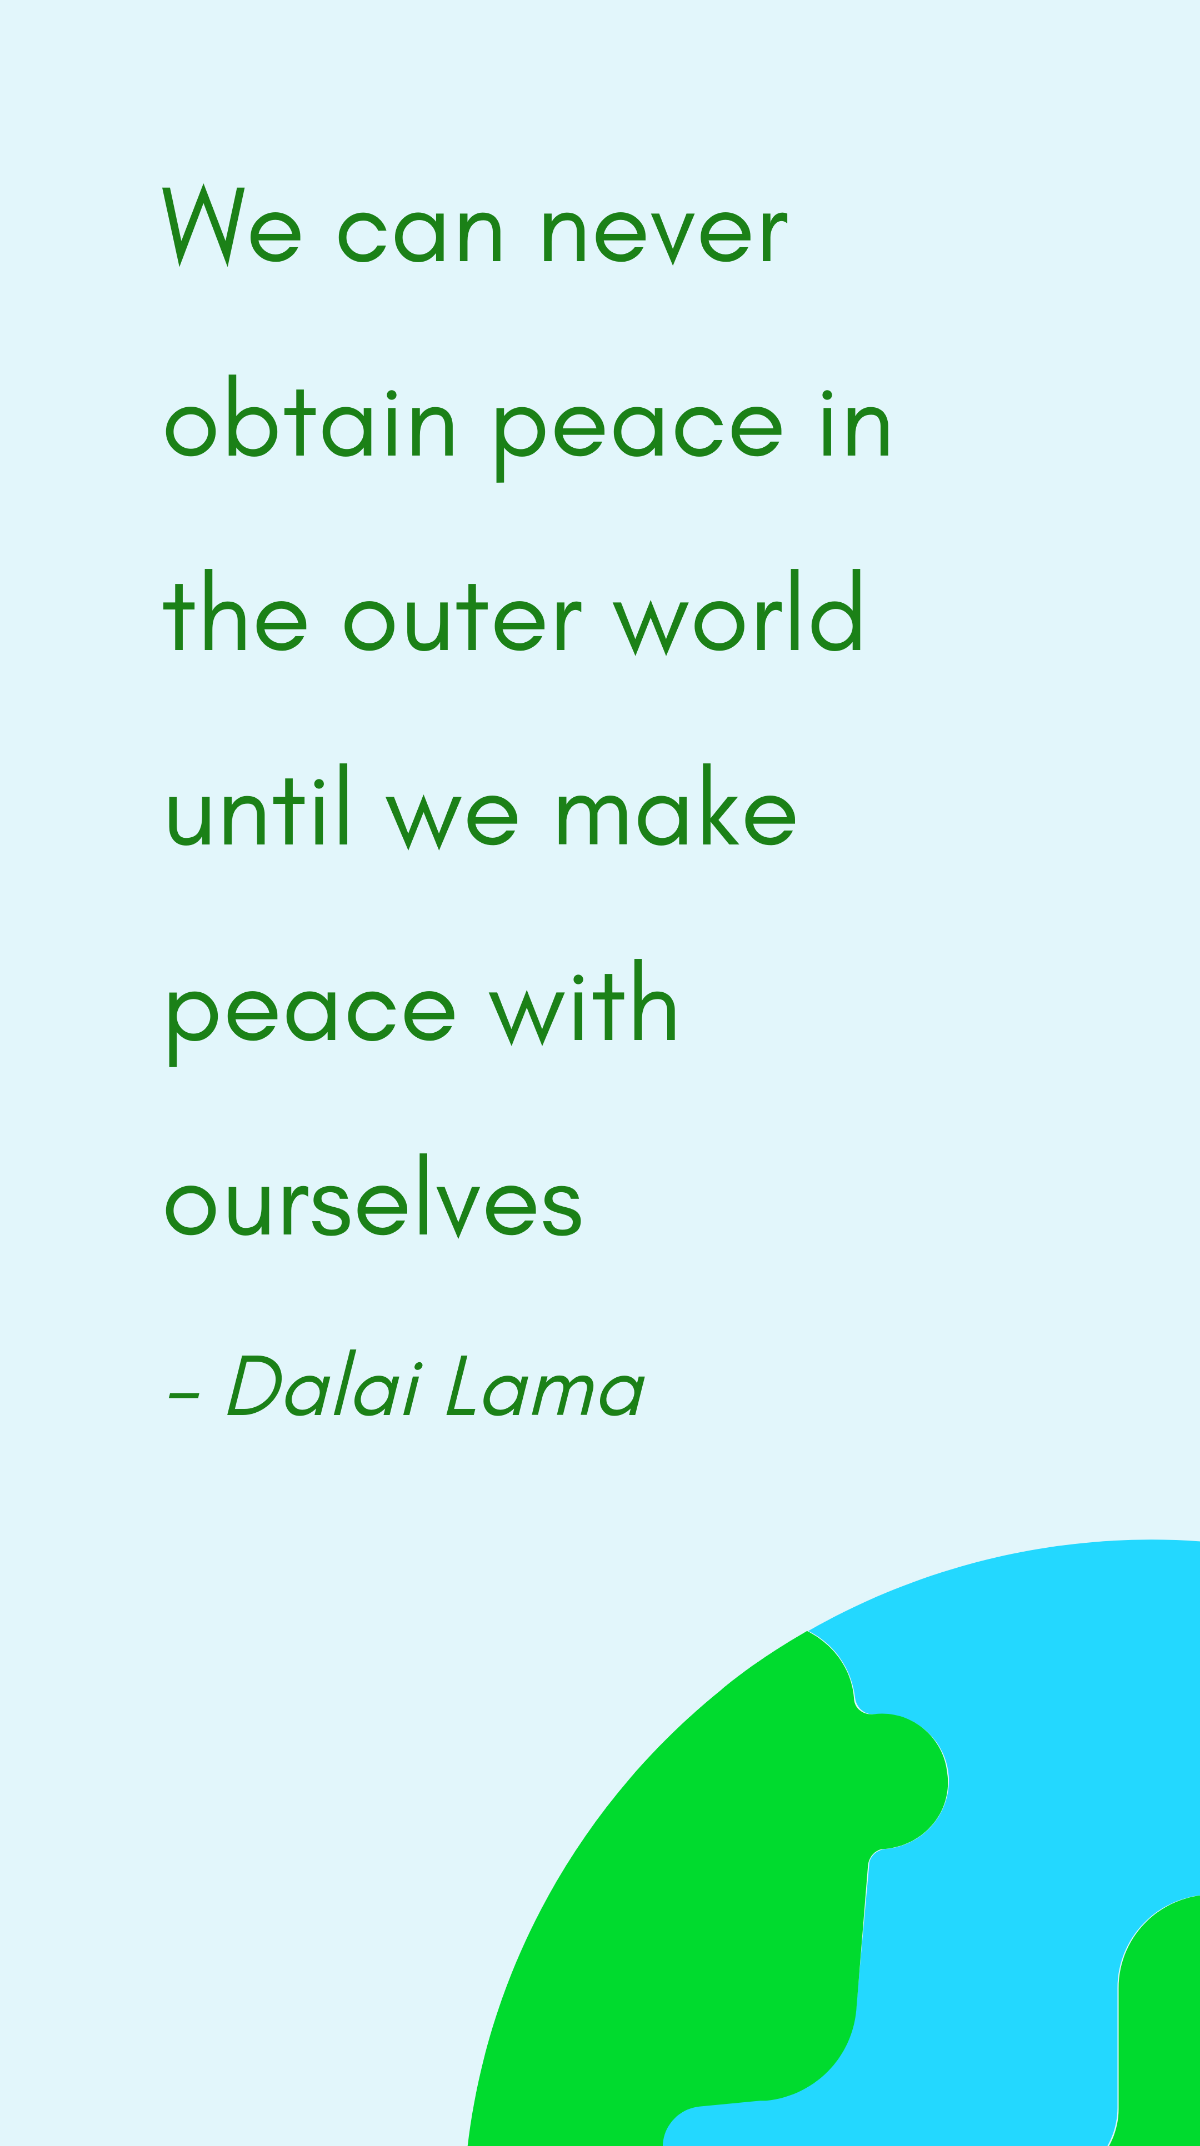 Free Dalai Lama - We can never obtain peace in the outer world until we make peace with ourselves Template